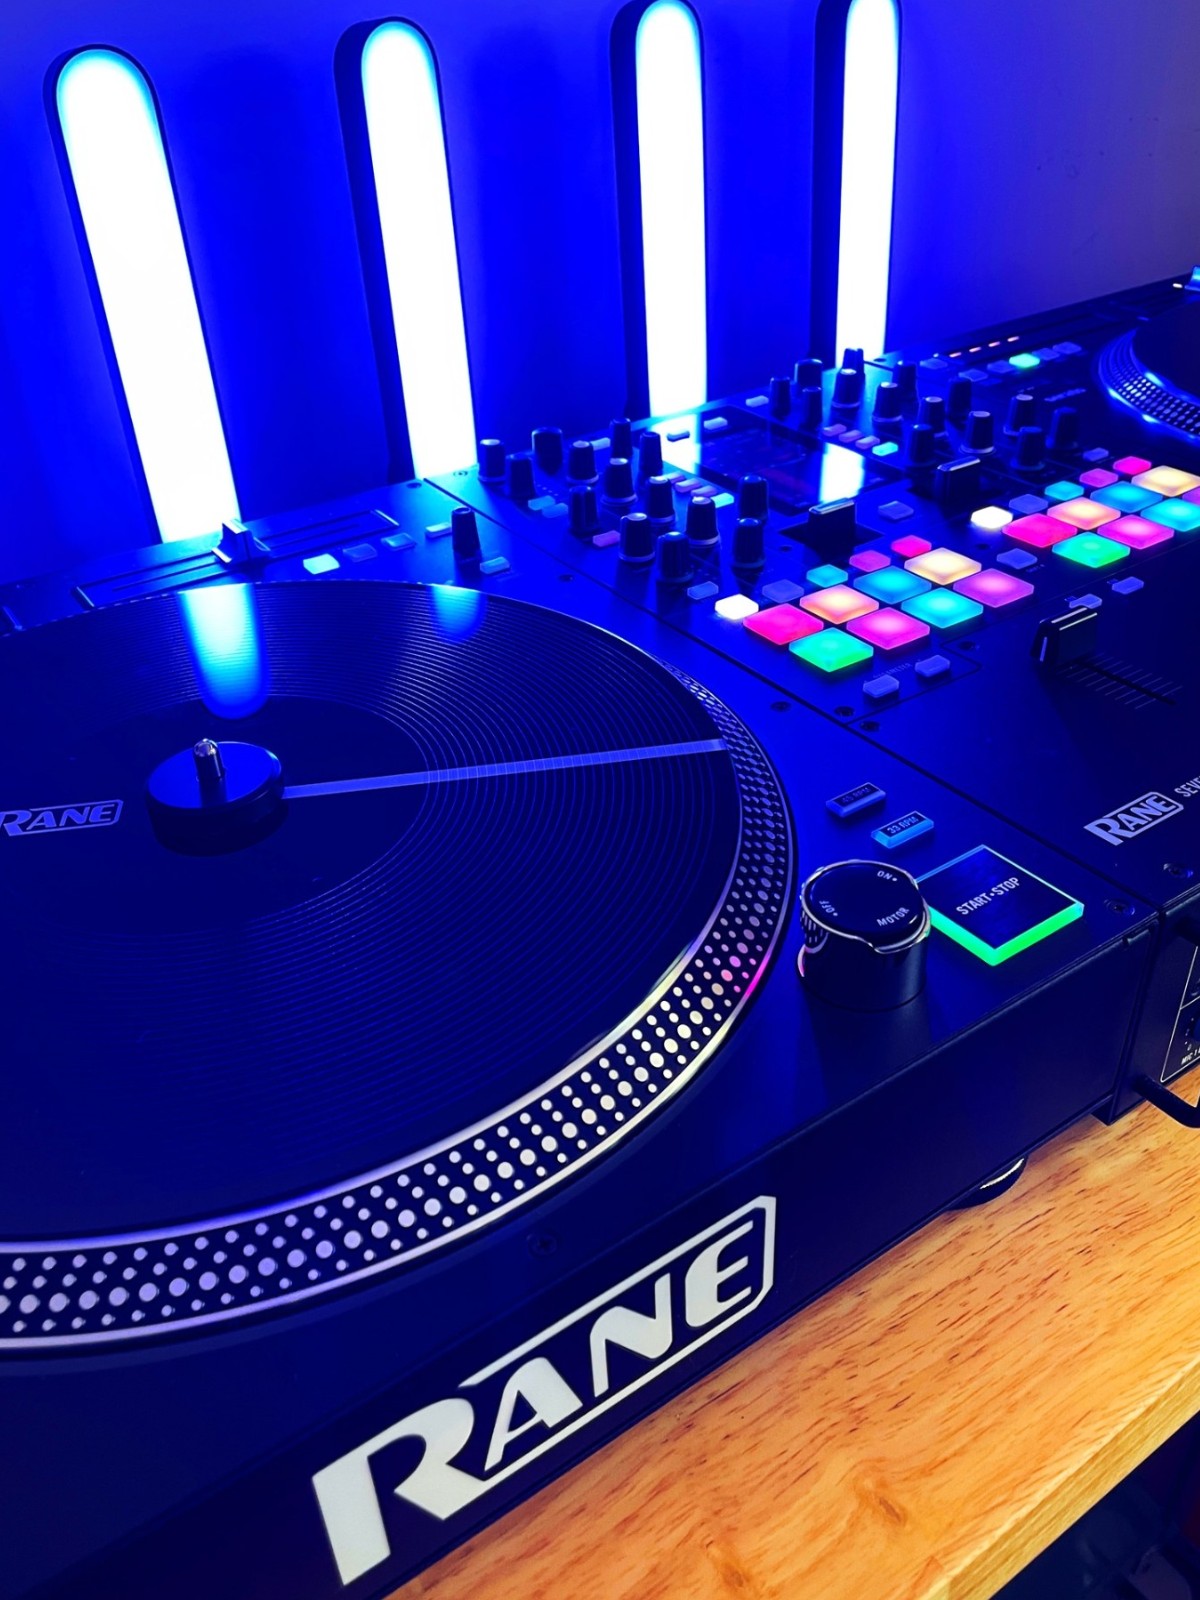 Rane On Take Your Dj Sets And Live Streams To The Next